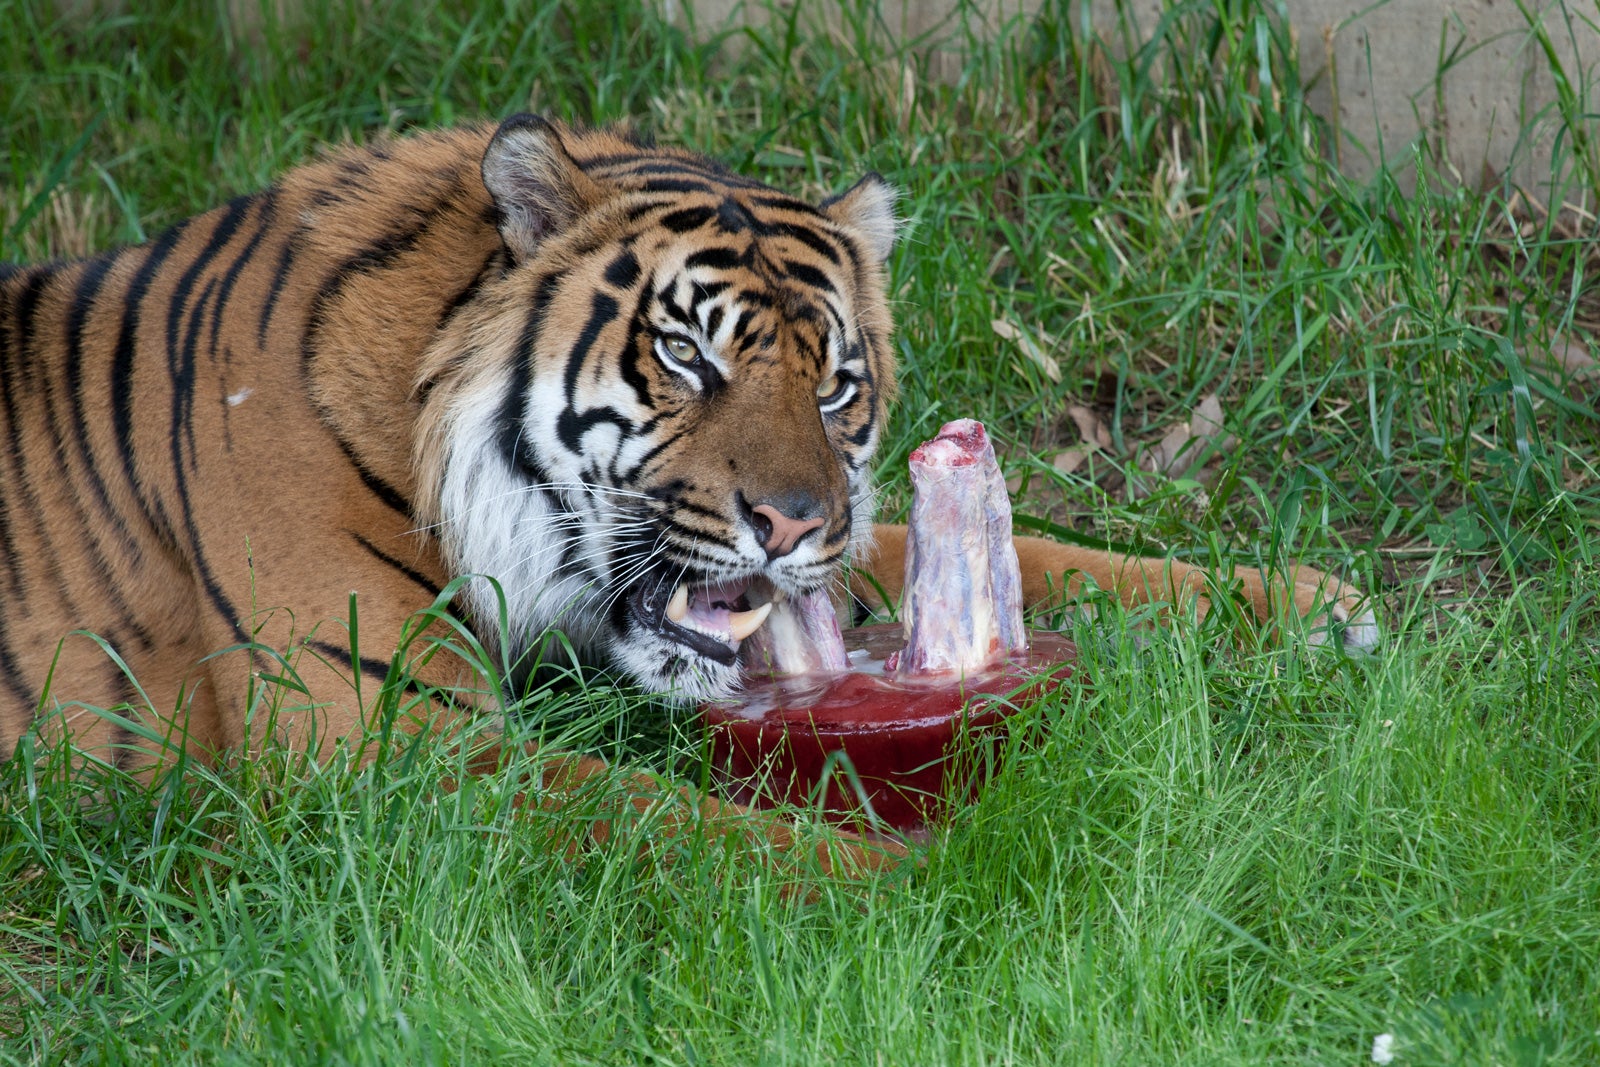 A tiger lays in the grass eating a "bloodsicle" made of frozen water and beef blood